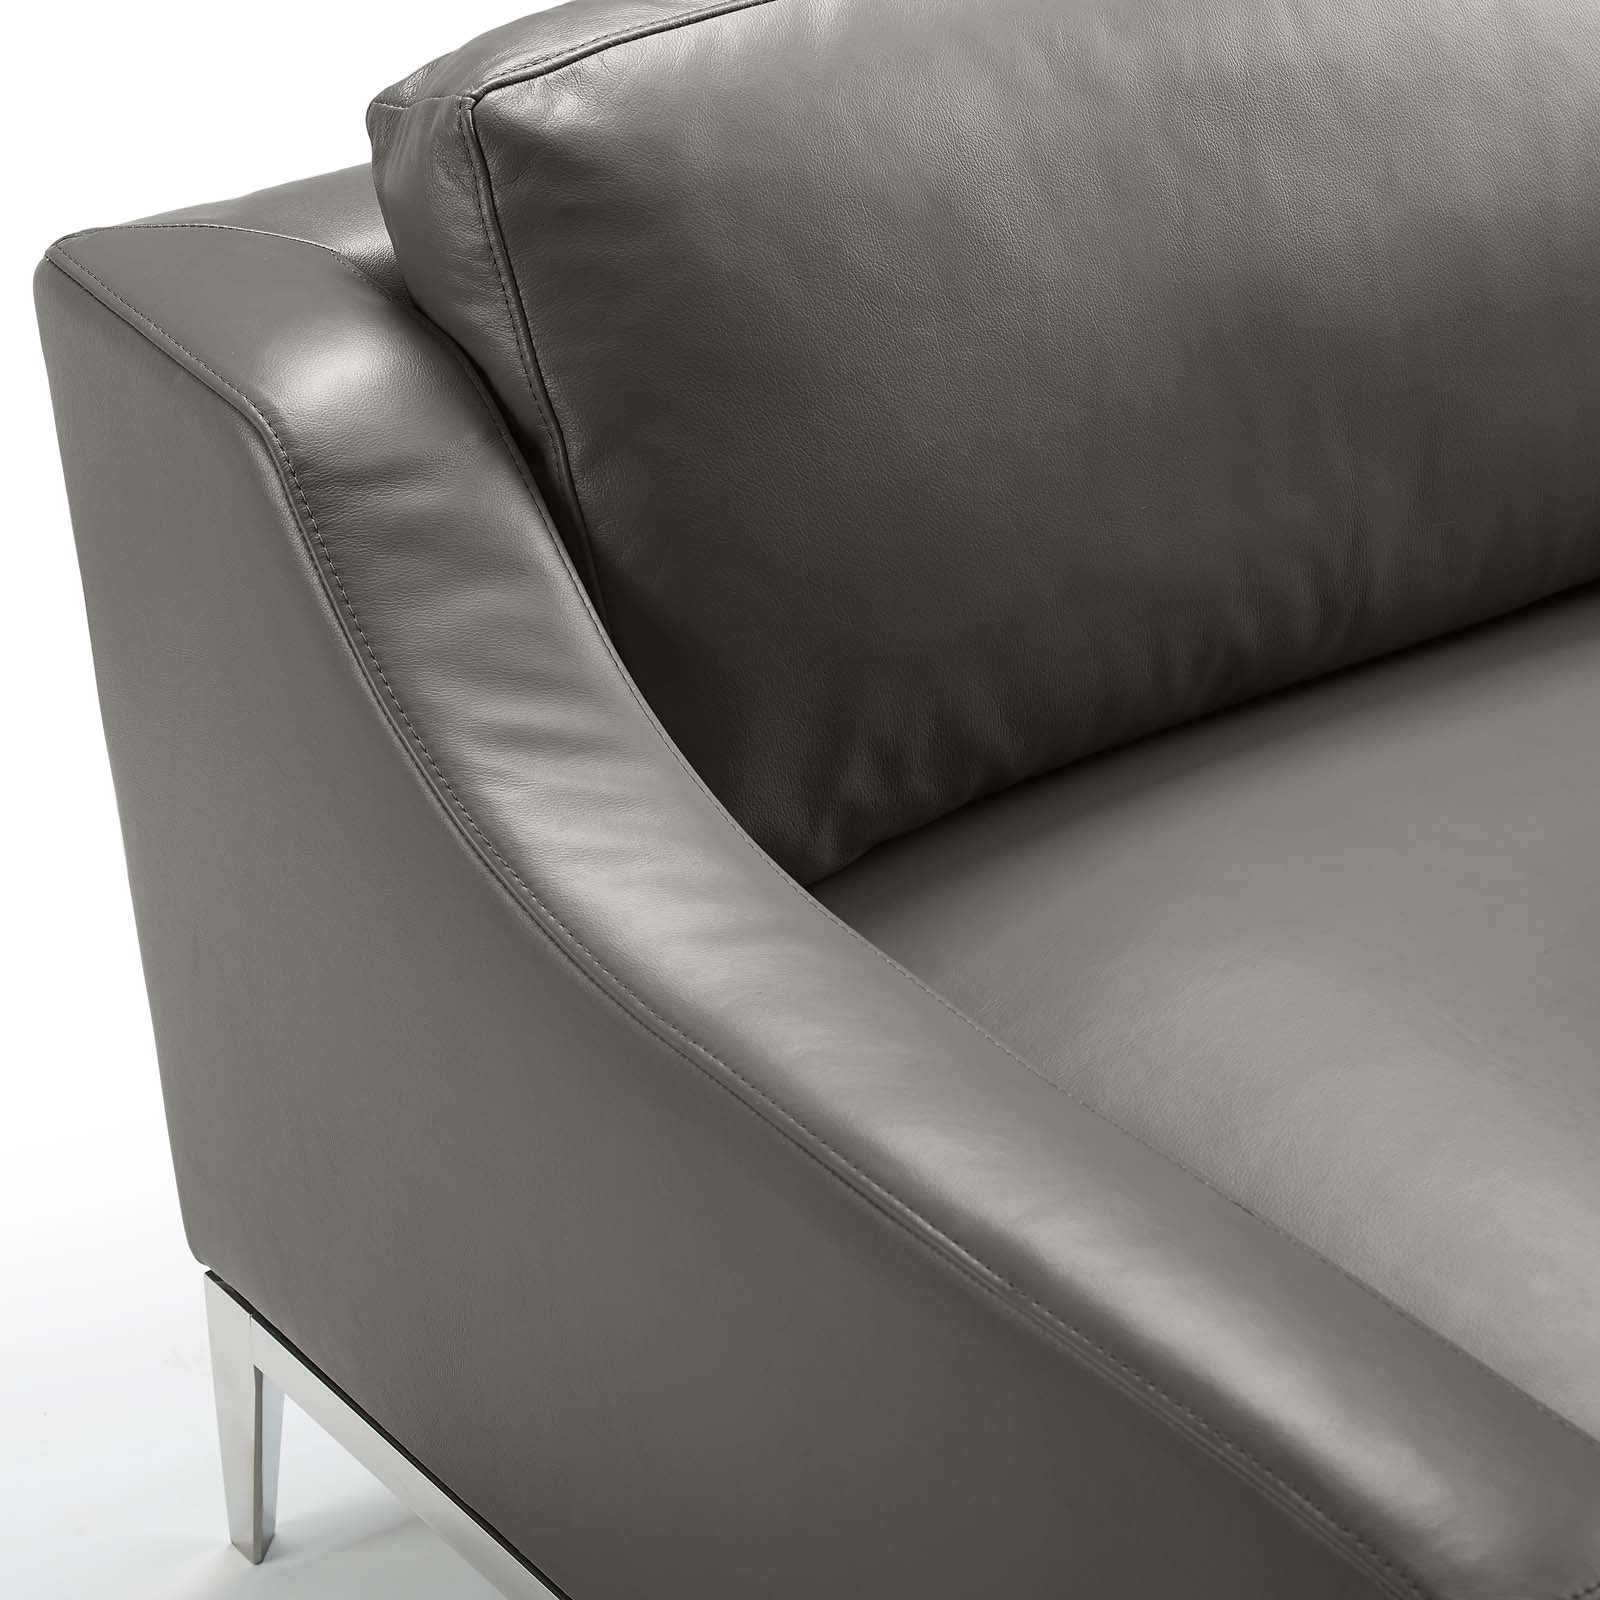 Harness 64" Stainless Steel Base Leather Loveseat-Loveseat-Modway-Wall2Wall Furnishings